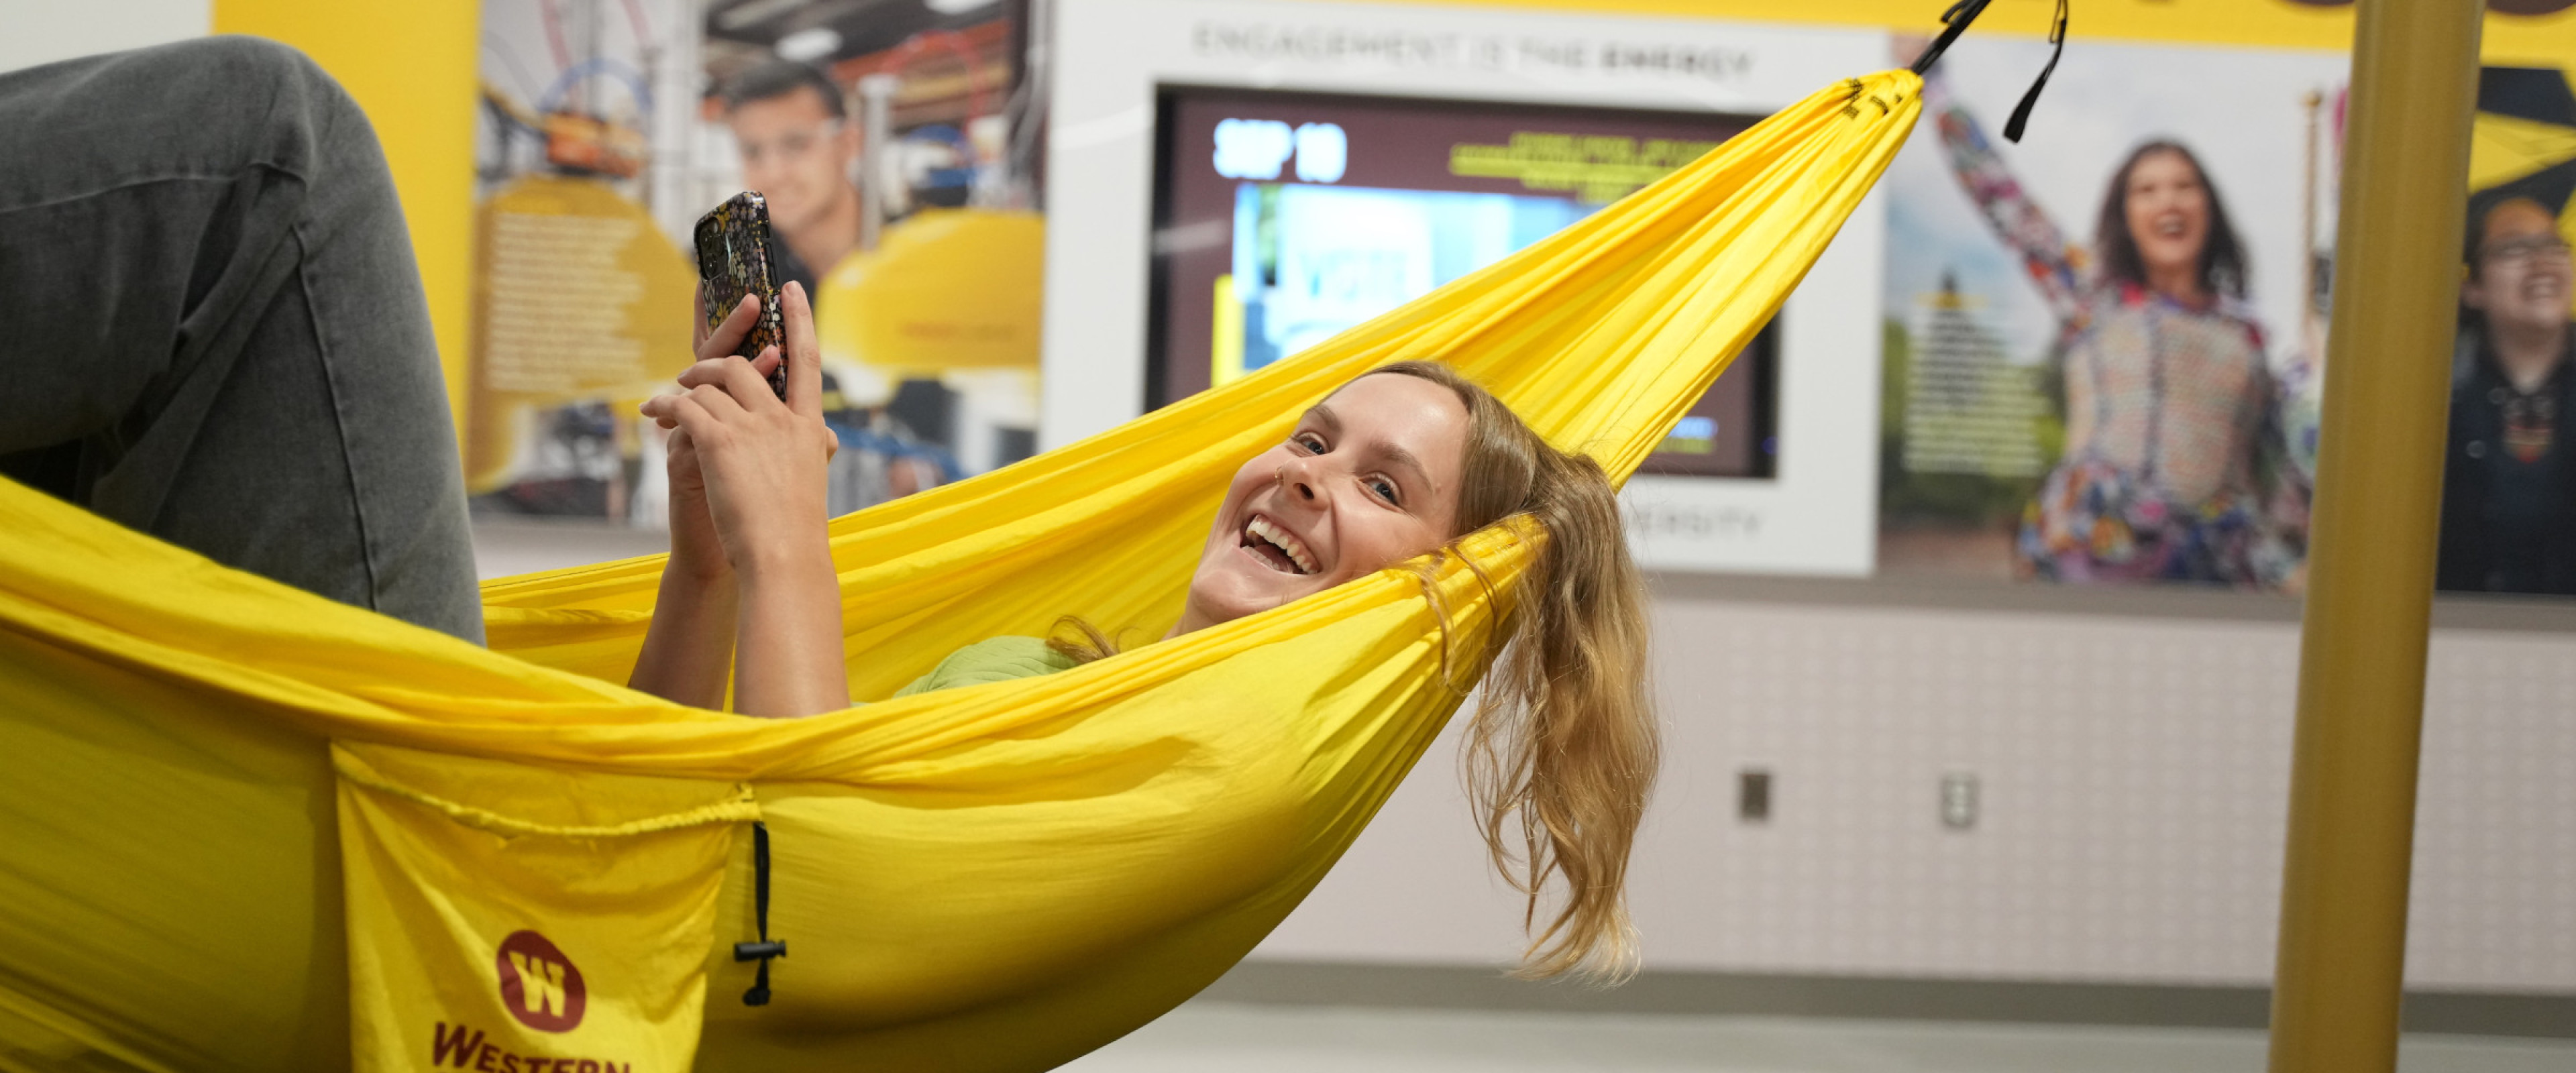 A student hammocking in the new student center.